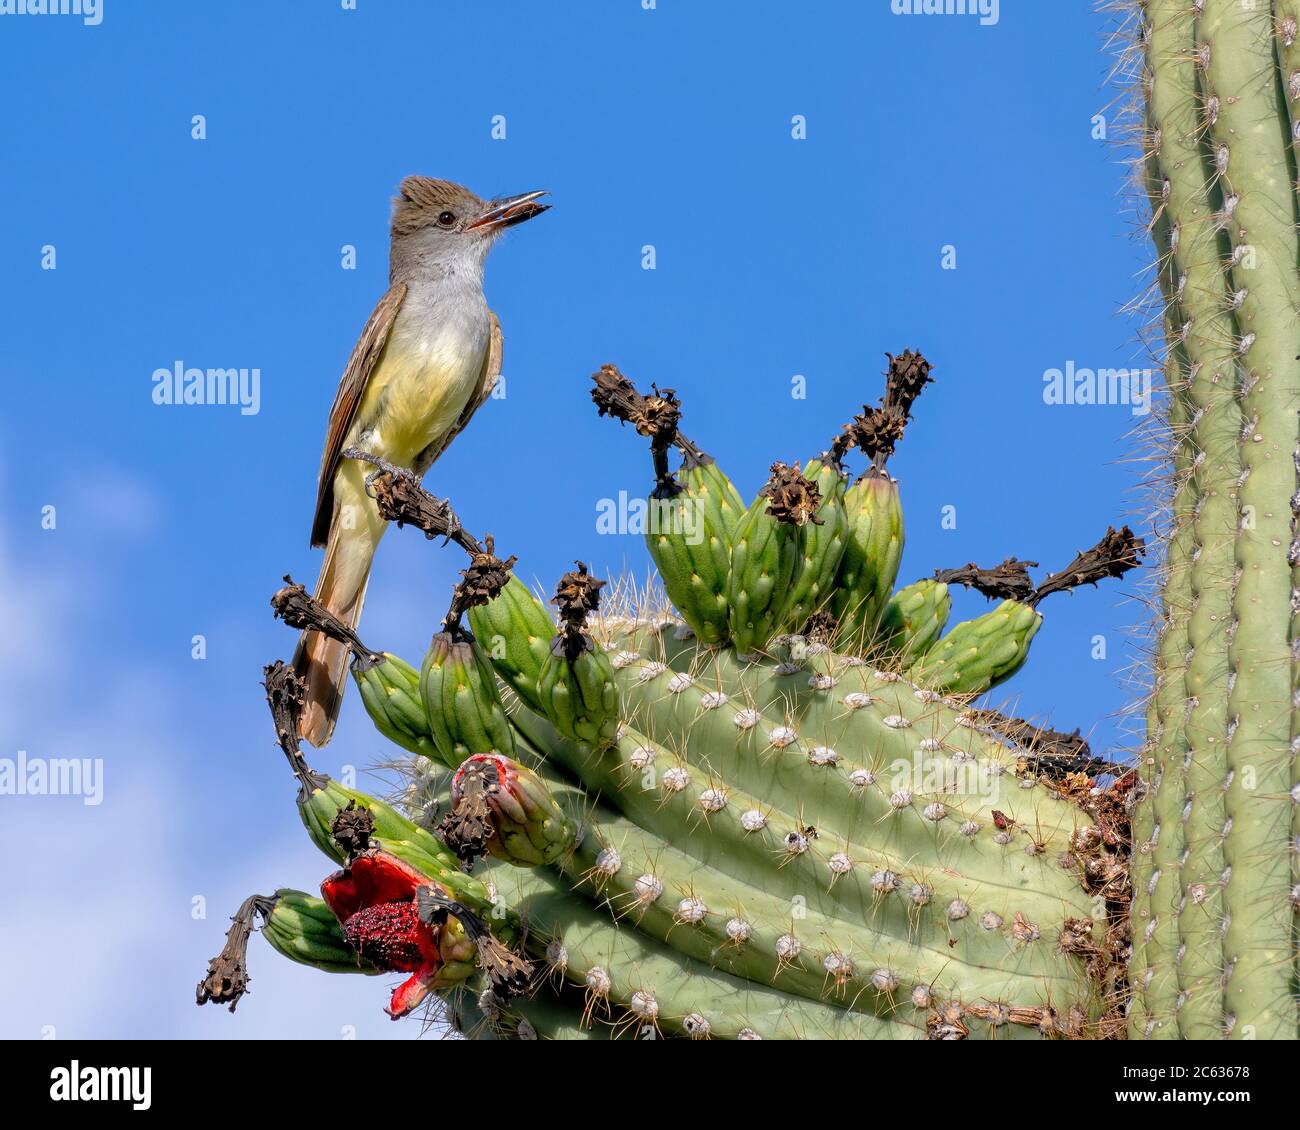 Brown Crested Flycatcher perched on Saguaro Cactus with Insect in Beak Stock Photo